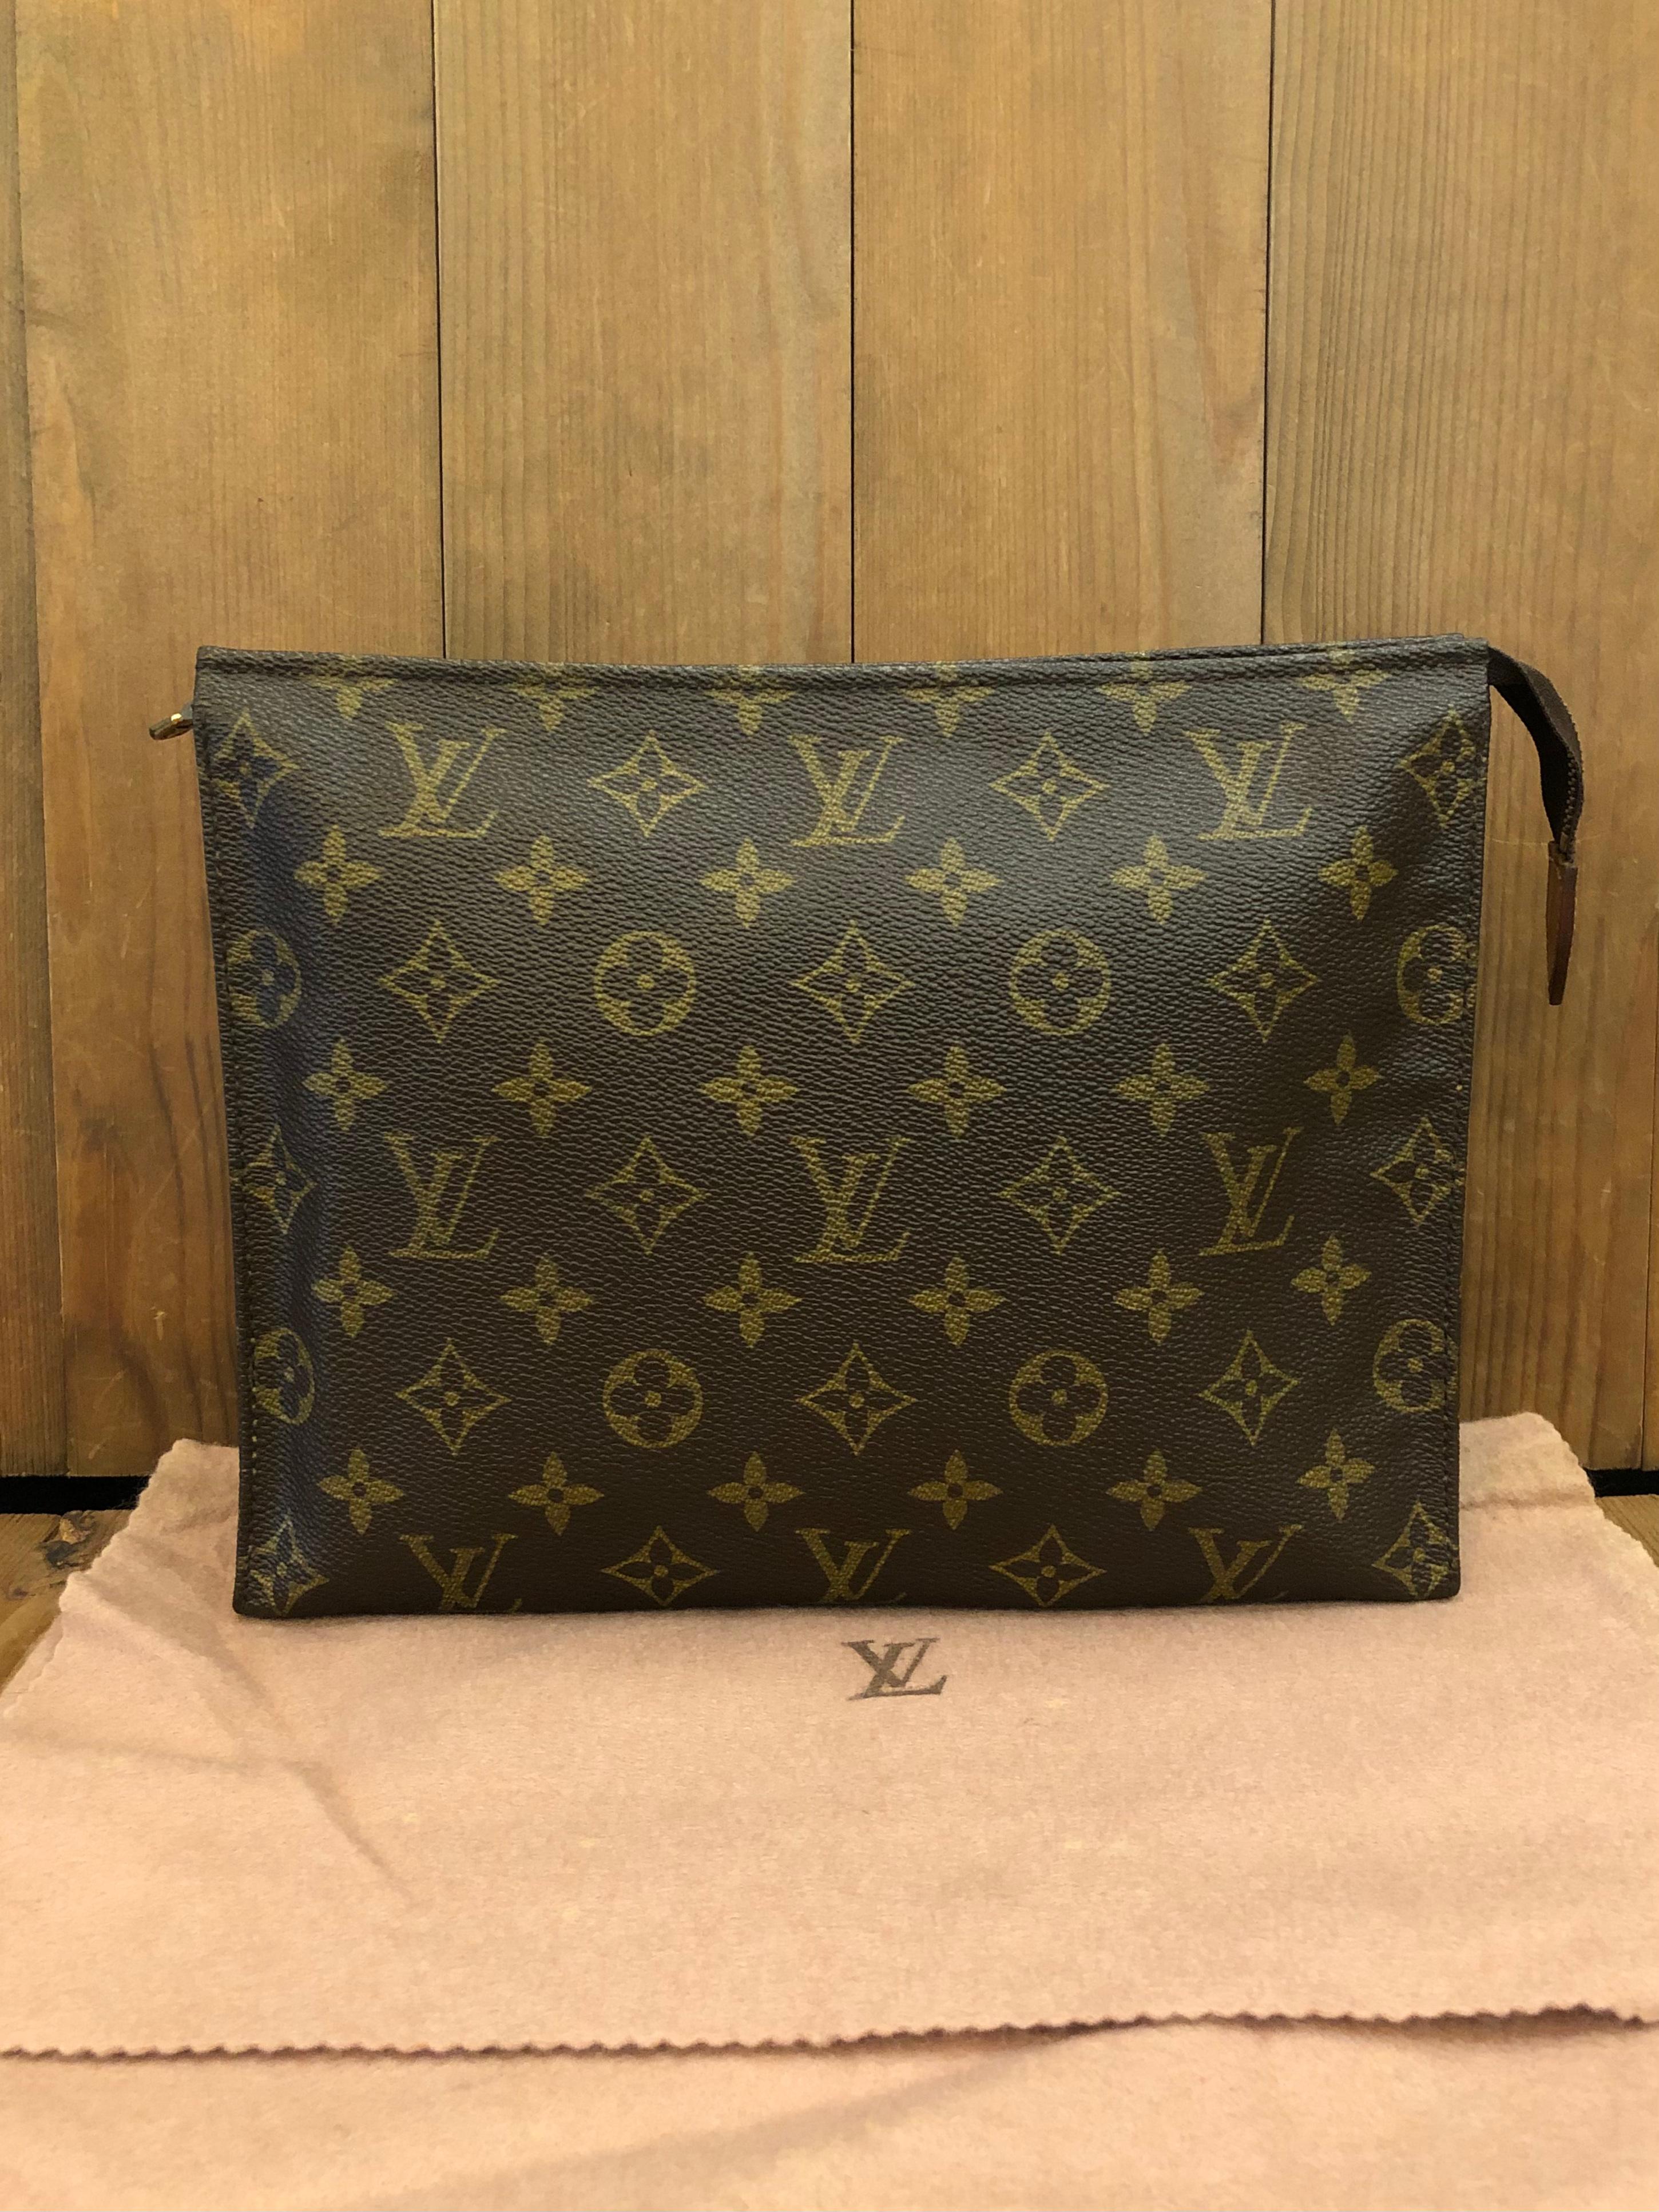 This vintage Louis Vuitton toiletry pouch is crafted of Louis Vuitton monogram toile canvas. Top zipper closure opens to an textured interior in ivory. This pouch is ideal for traveling and can even be used as a chic clutch for your essentials for